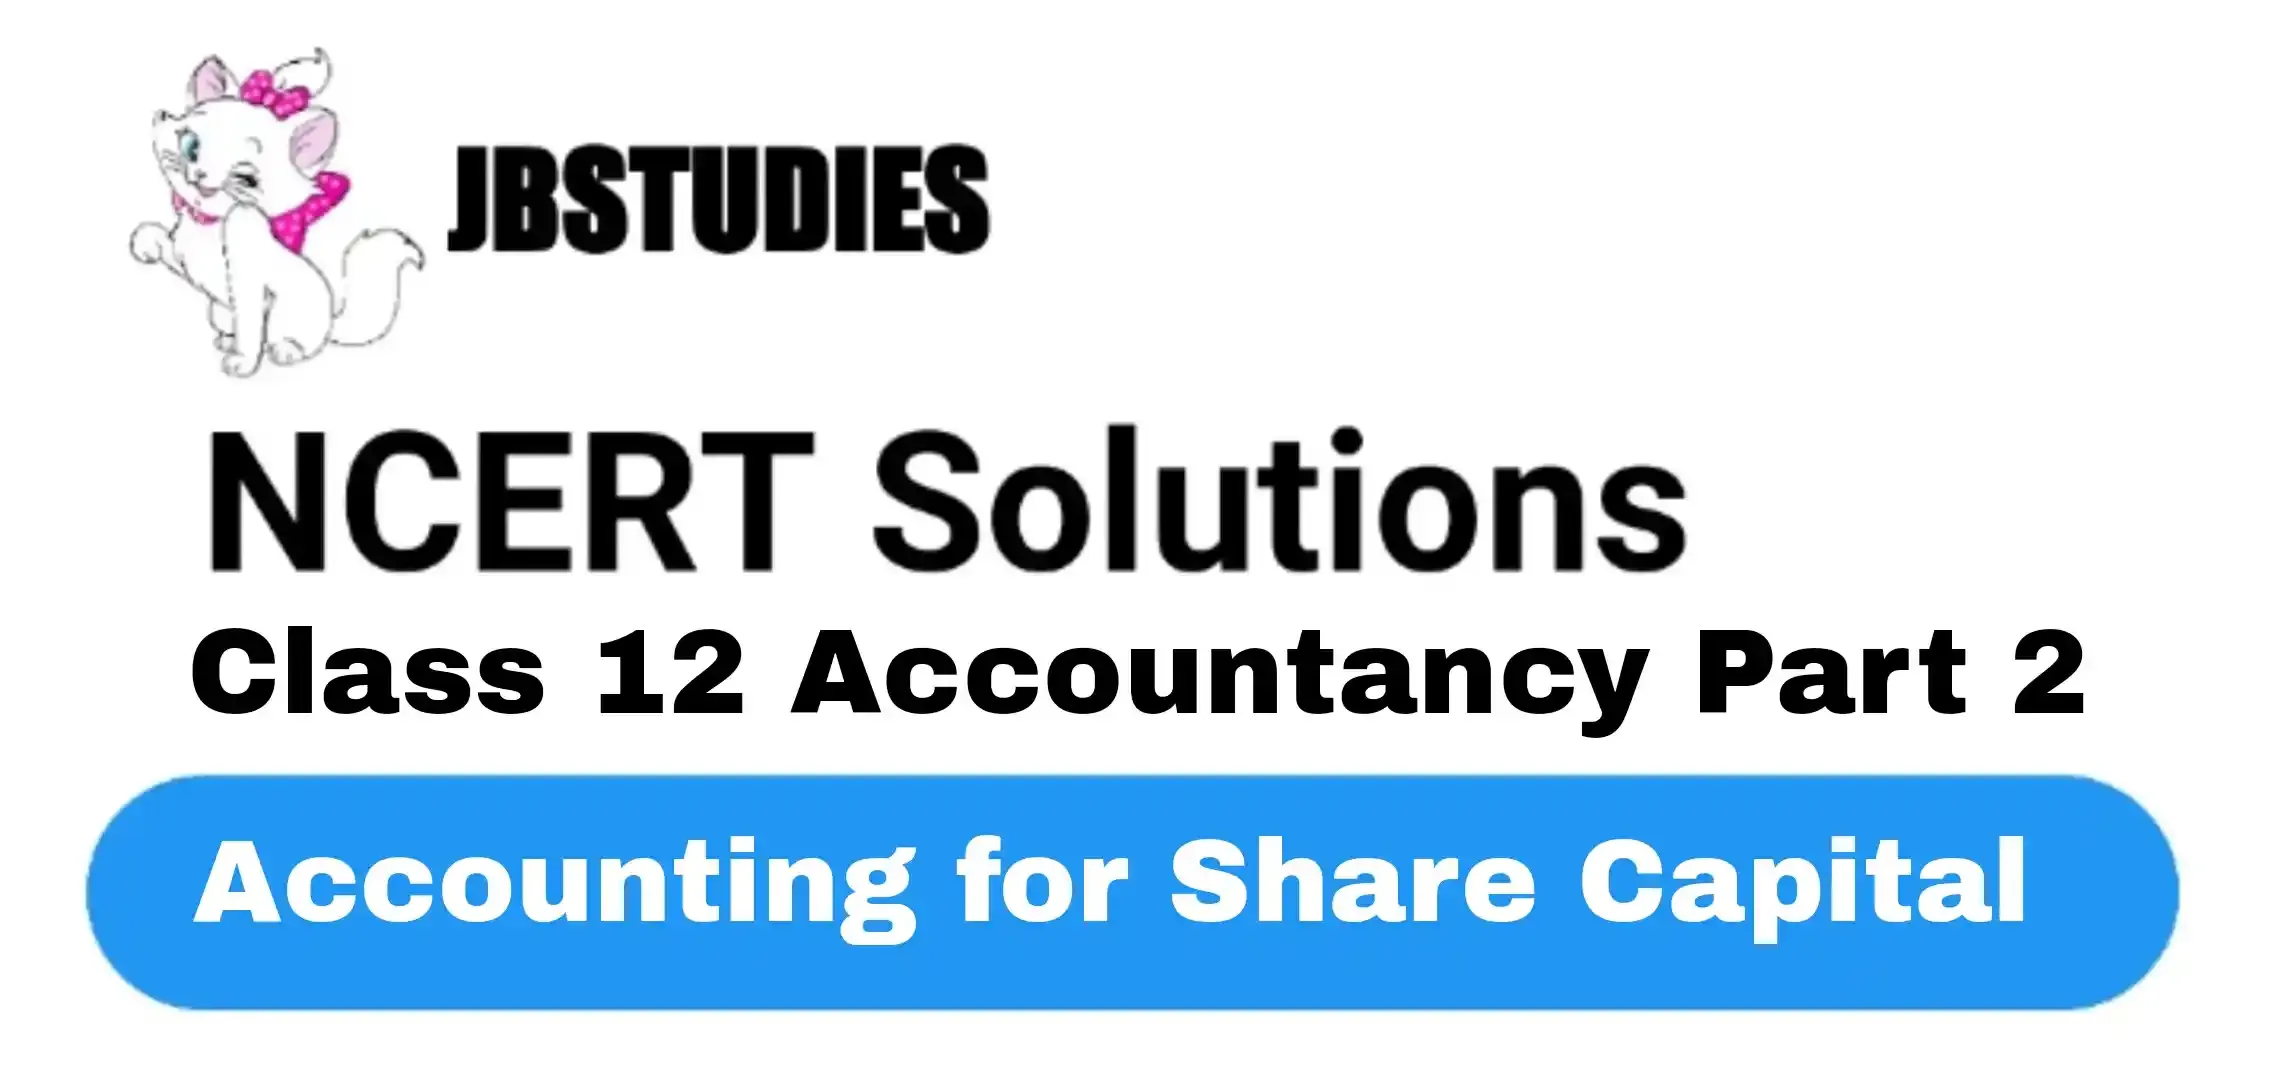 Solutions Class 12 Accountancy Part II Chapter -1 (Accounting for Share Capital)